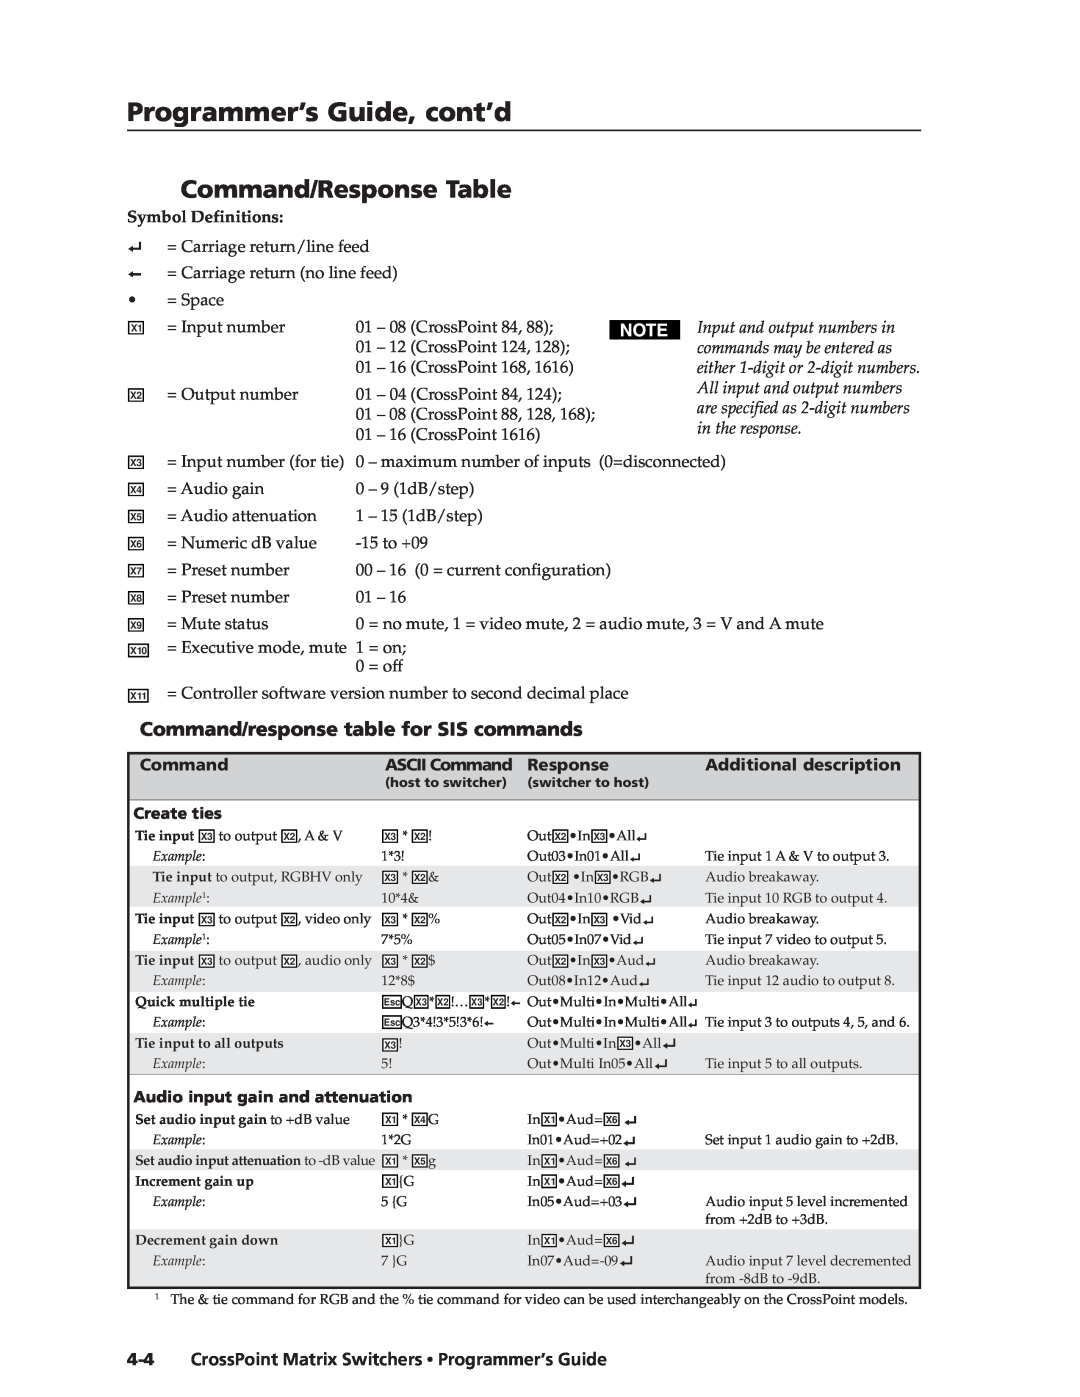 Extron electronic CrossPoint 124 Programmer’s Guide, cont’d, Command/Response Table, Symbol Definitions, ASCII Command 